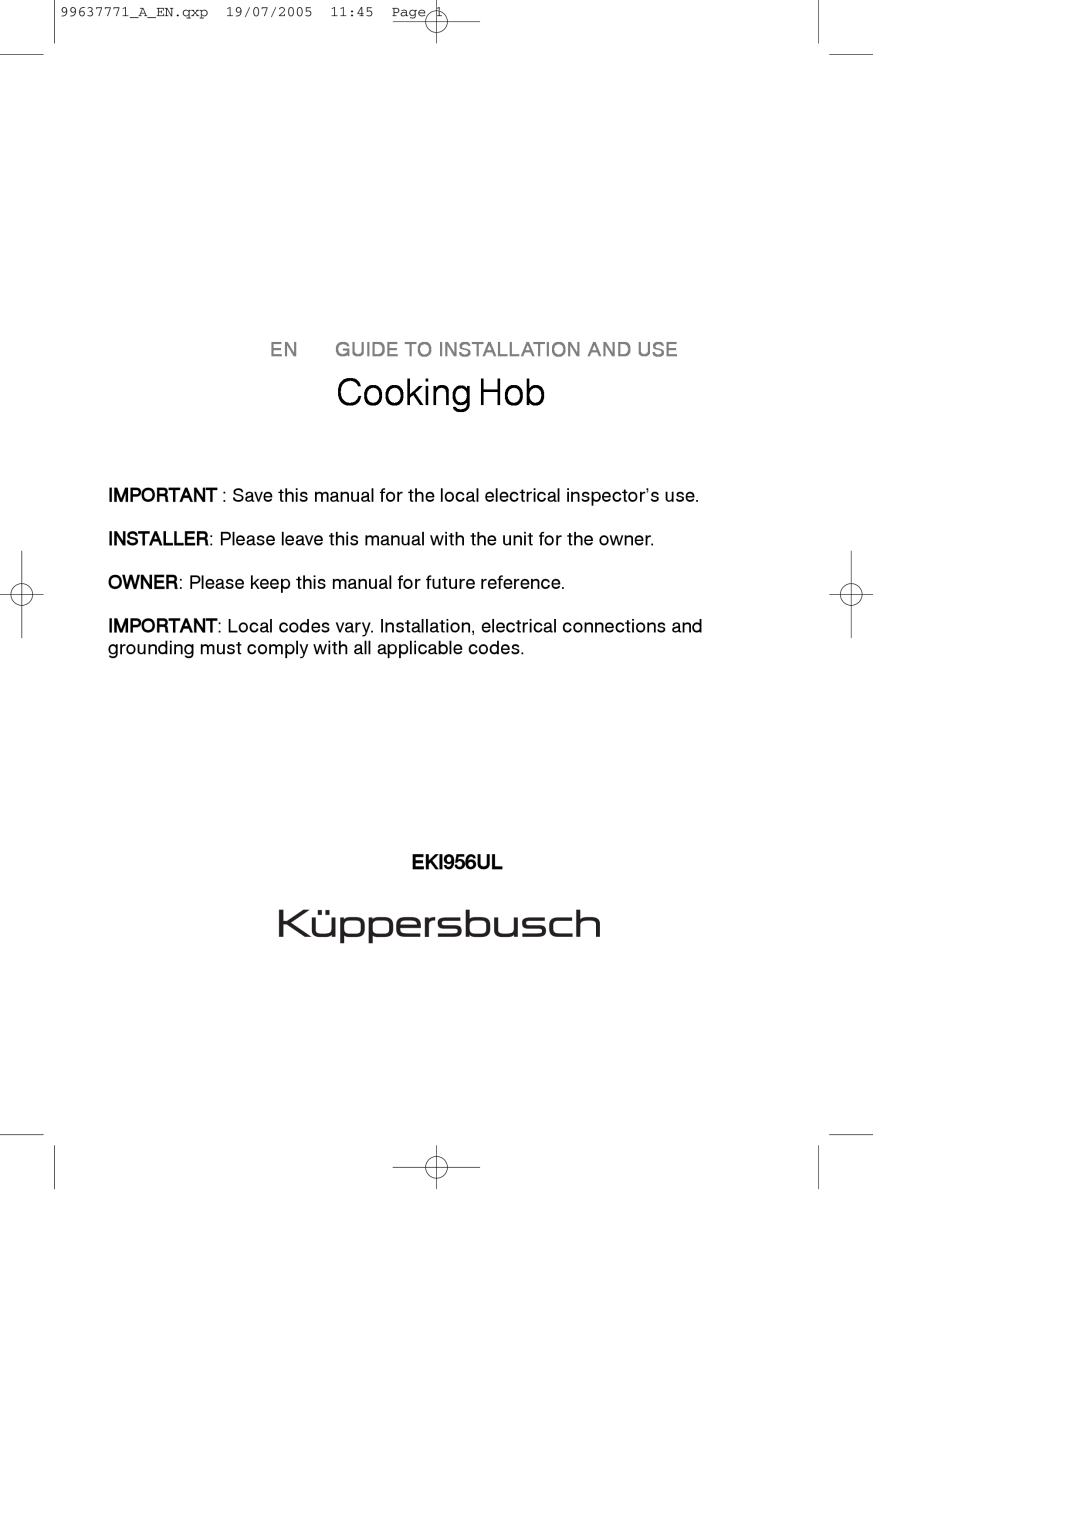 Kuppersbusch USA EKI956UL manual Cooking Hob, En Guide To Installation And Use, 99637771AEN.qxp 19/07/2005 1145 Page 